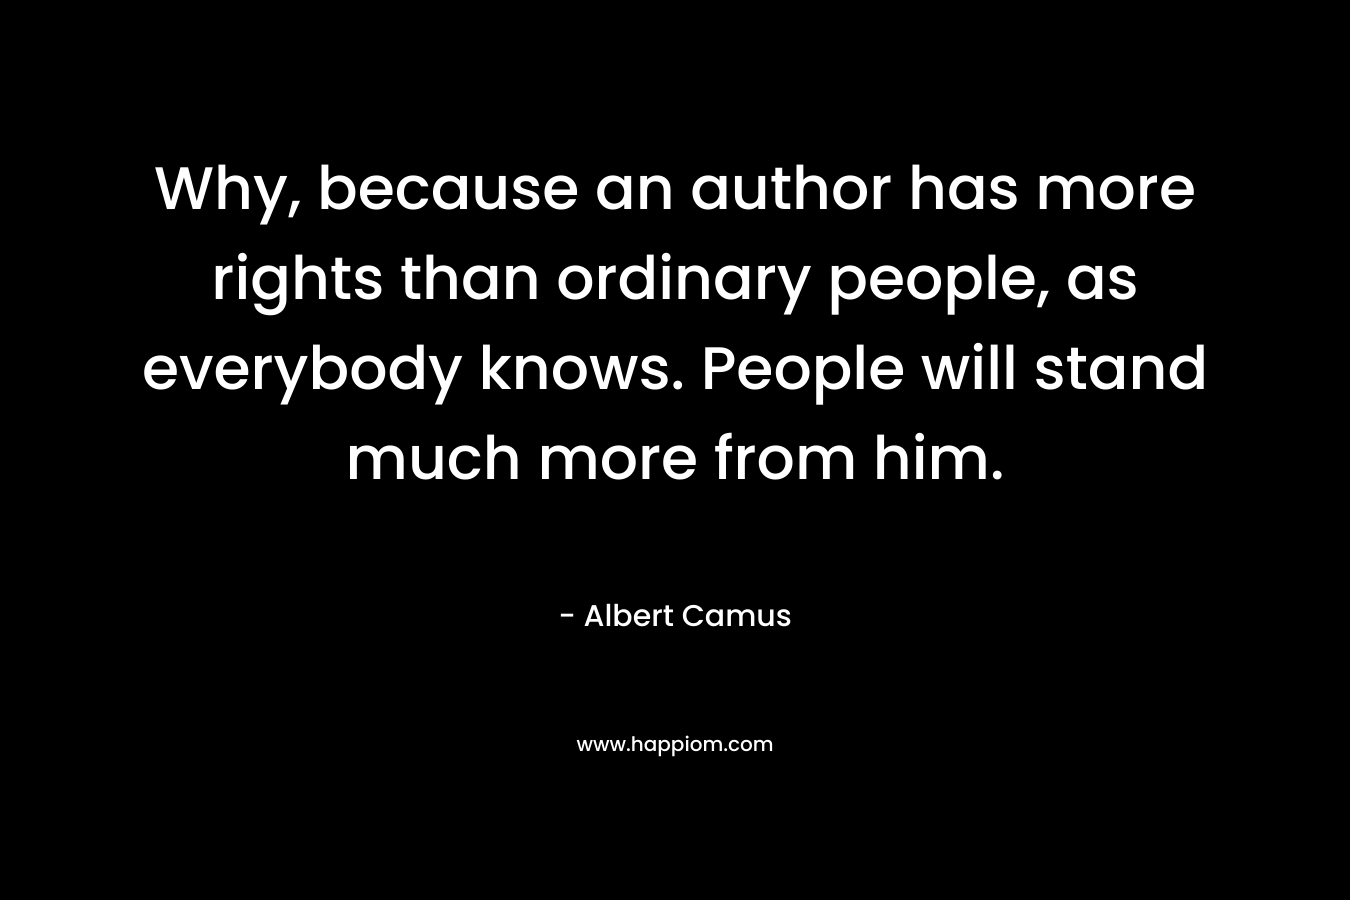 Why, because an author has more rights than ordinary people, as everybody knows. People will stand much more from him.